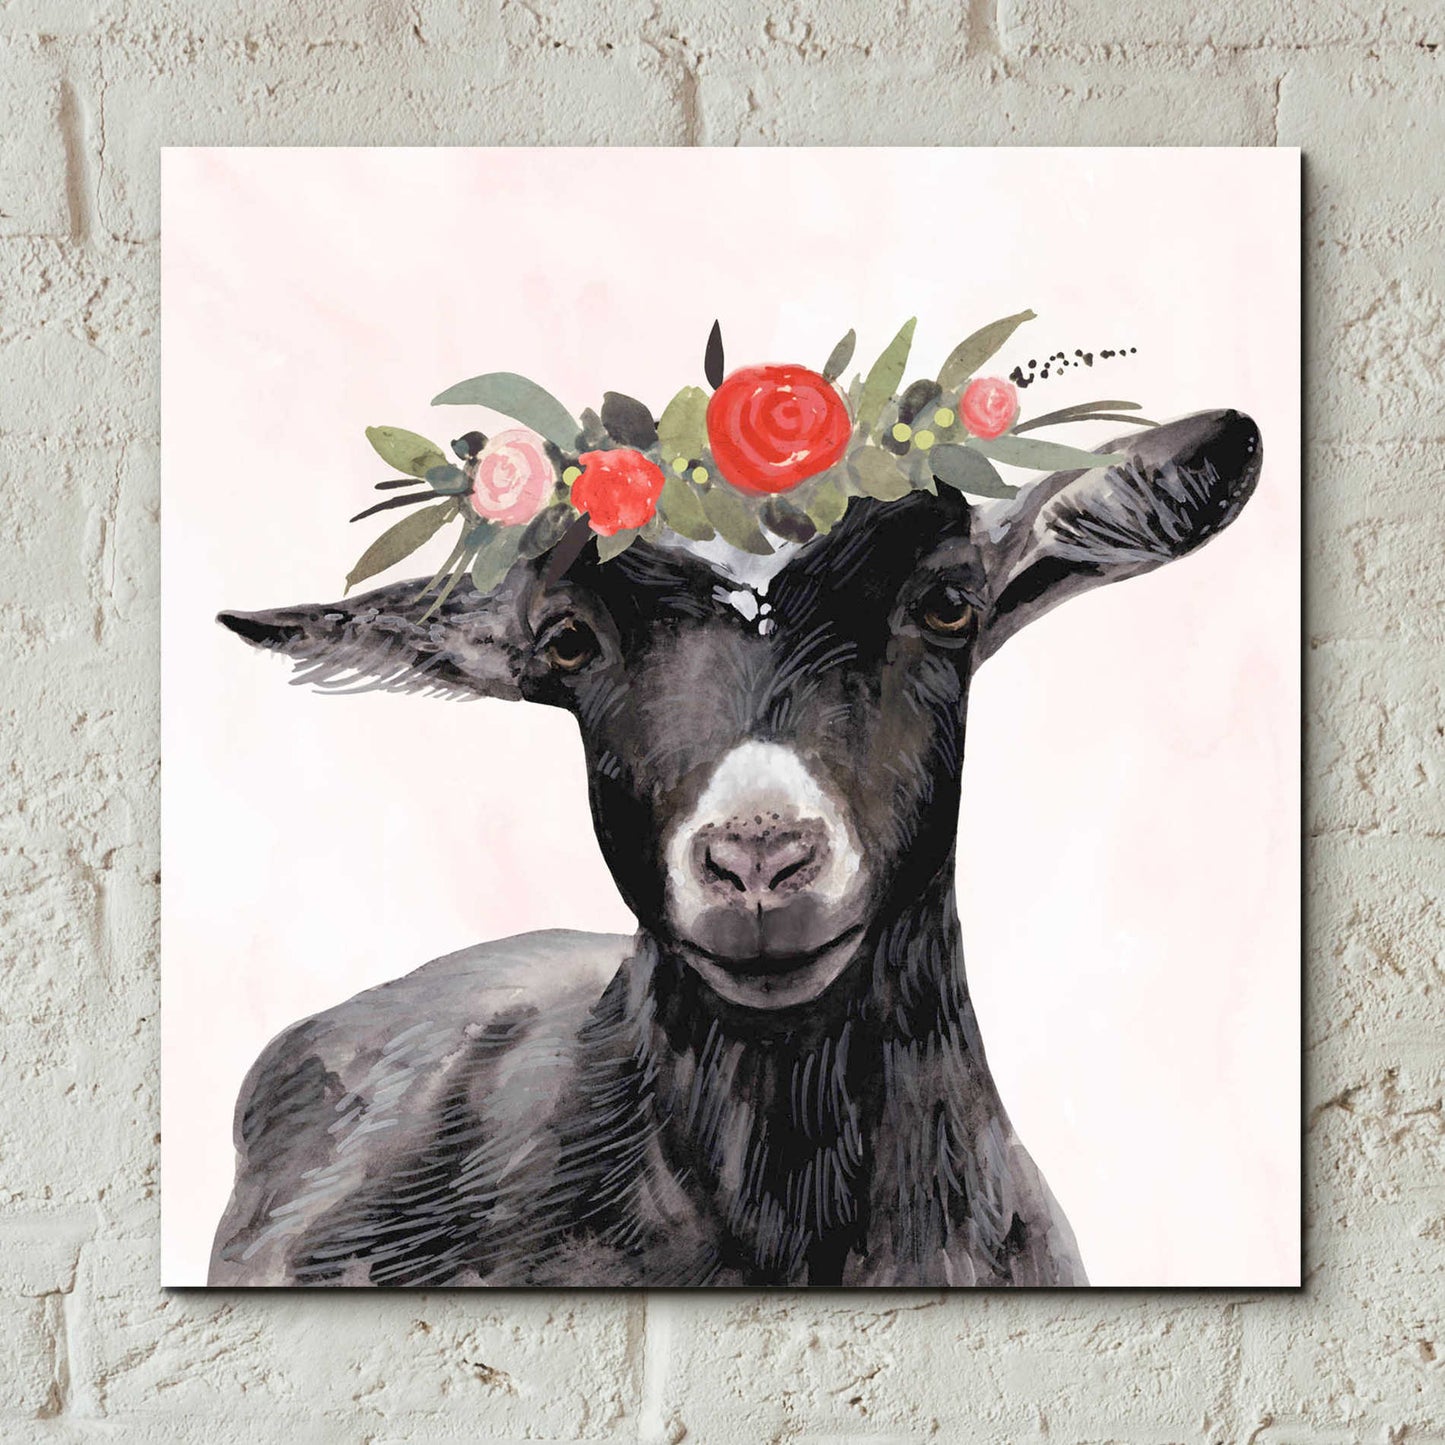 Epic Art 'Garden Goat III' by Victoria Borges, Acrylic Glass Wall Art,12x12